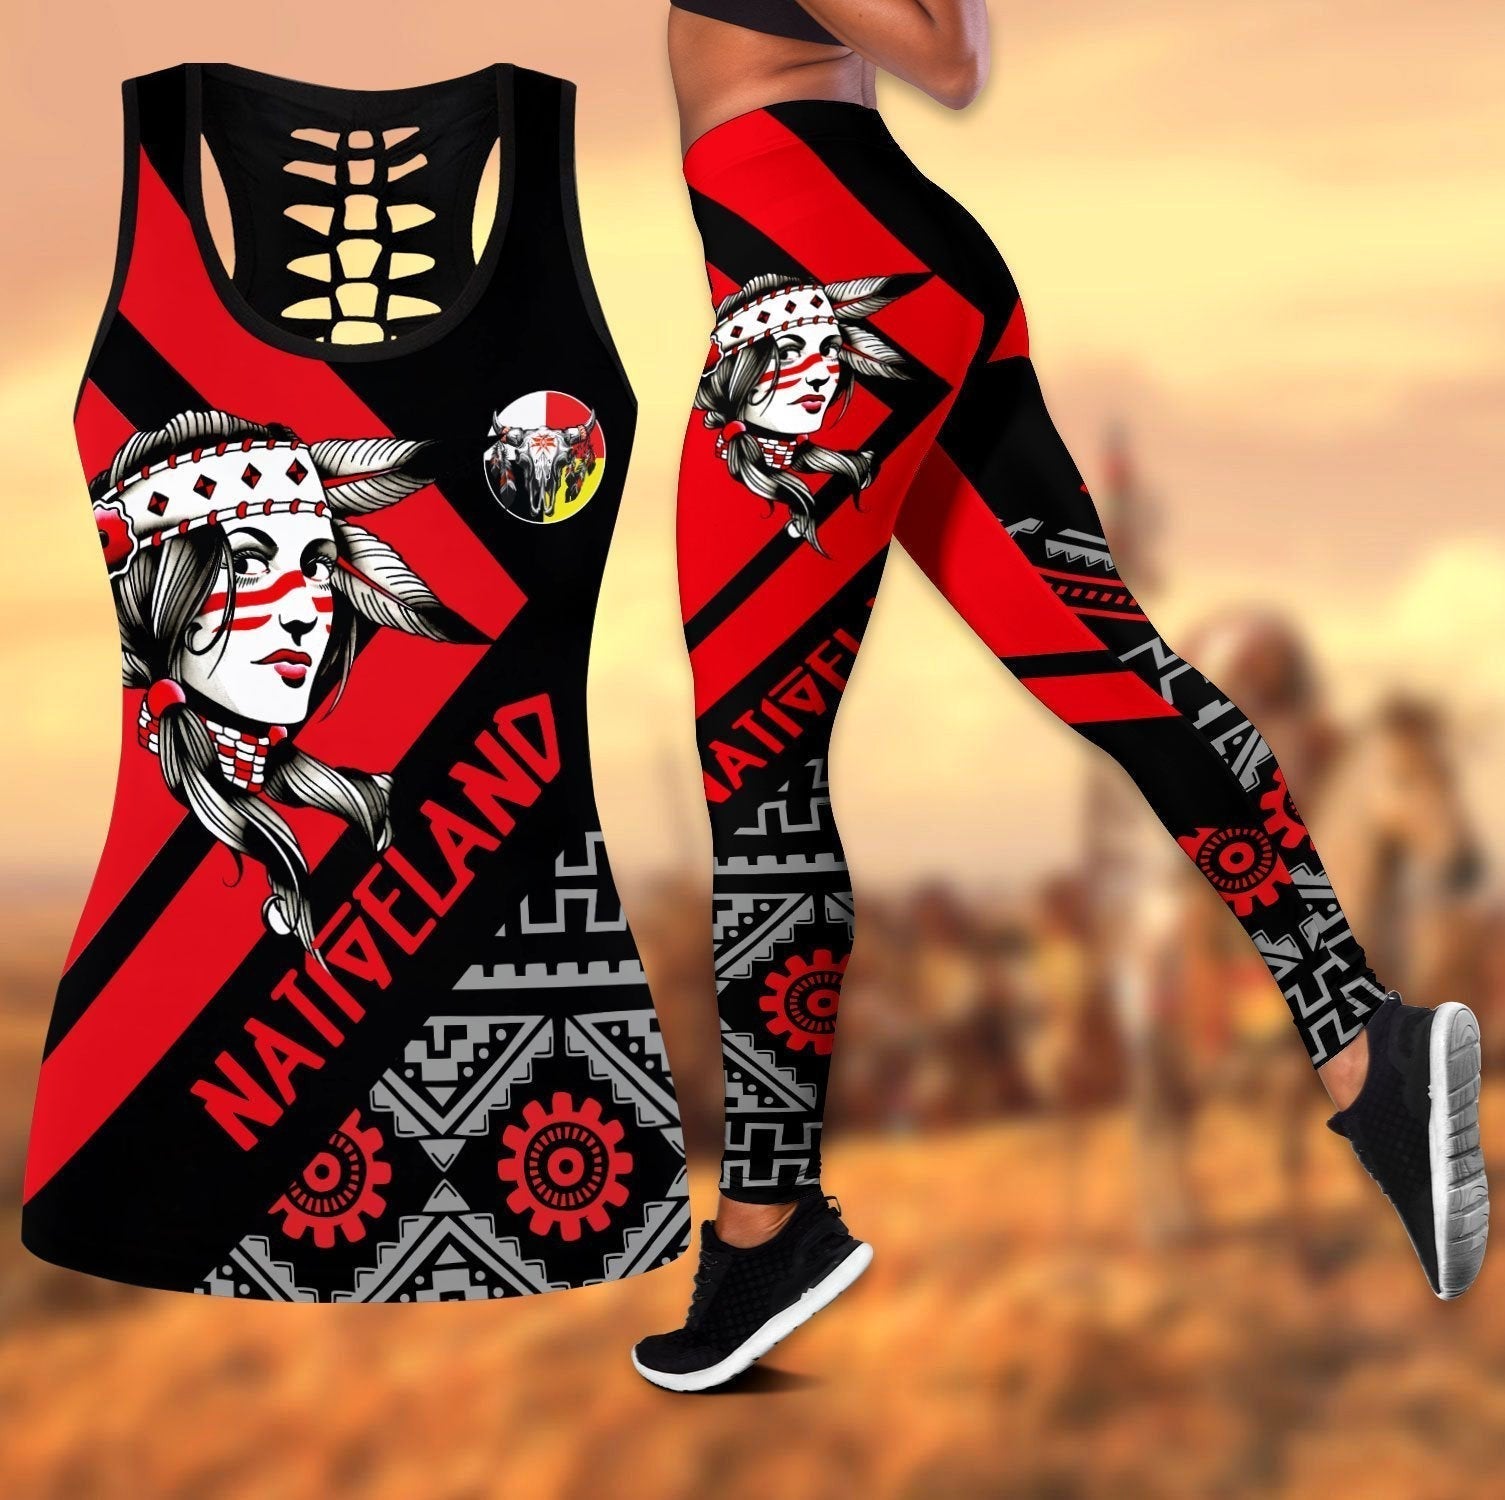 native-girl-native-american-all-over-printed-leggings-and-hollow-tank